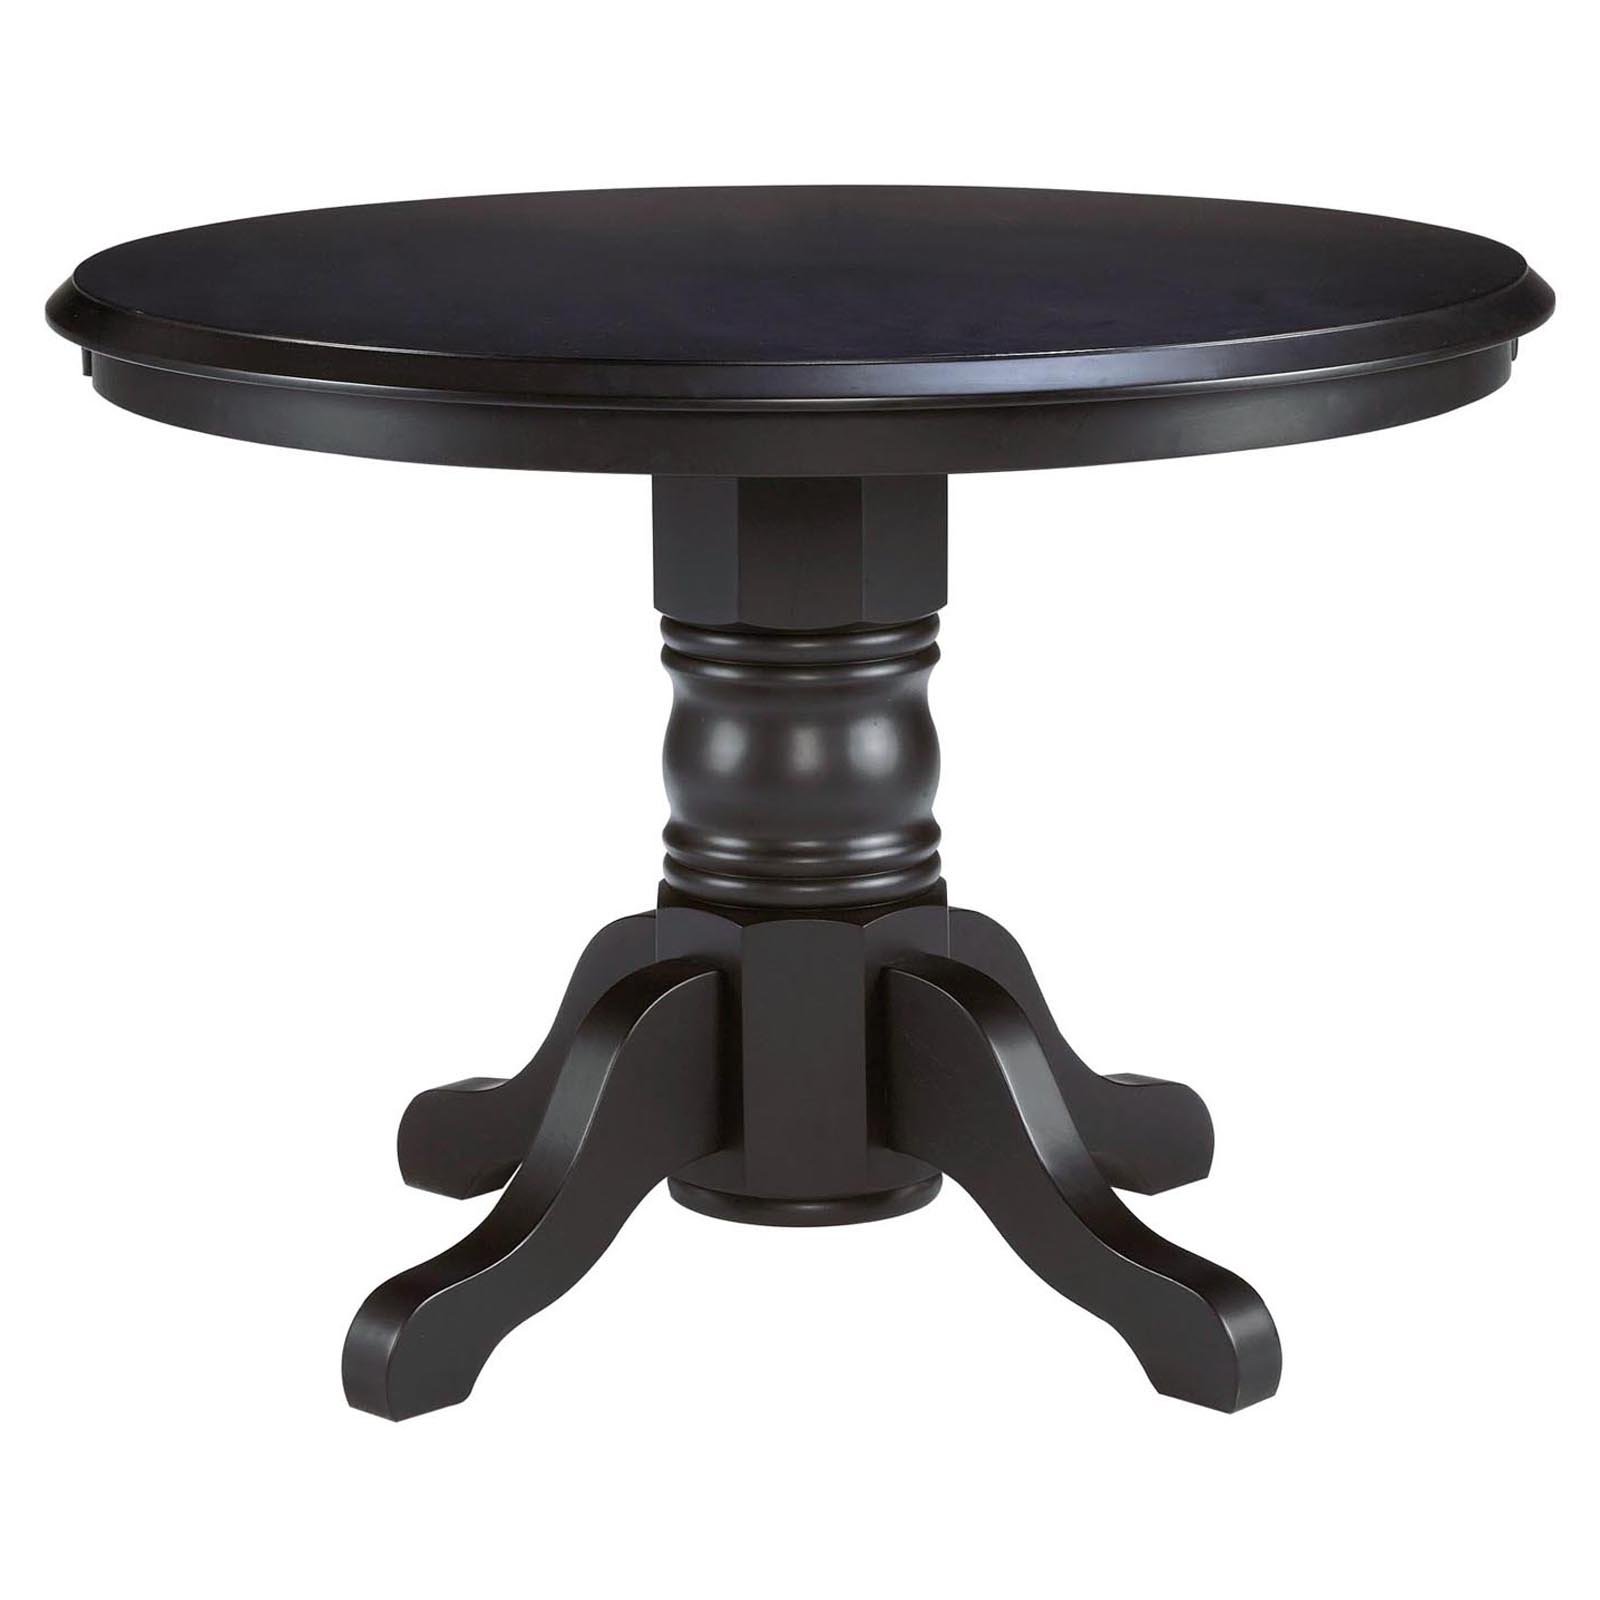 Homestyles 5 Piece Wood Dining Set with Pedestal Table in Black - image 3 of 3